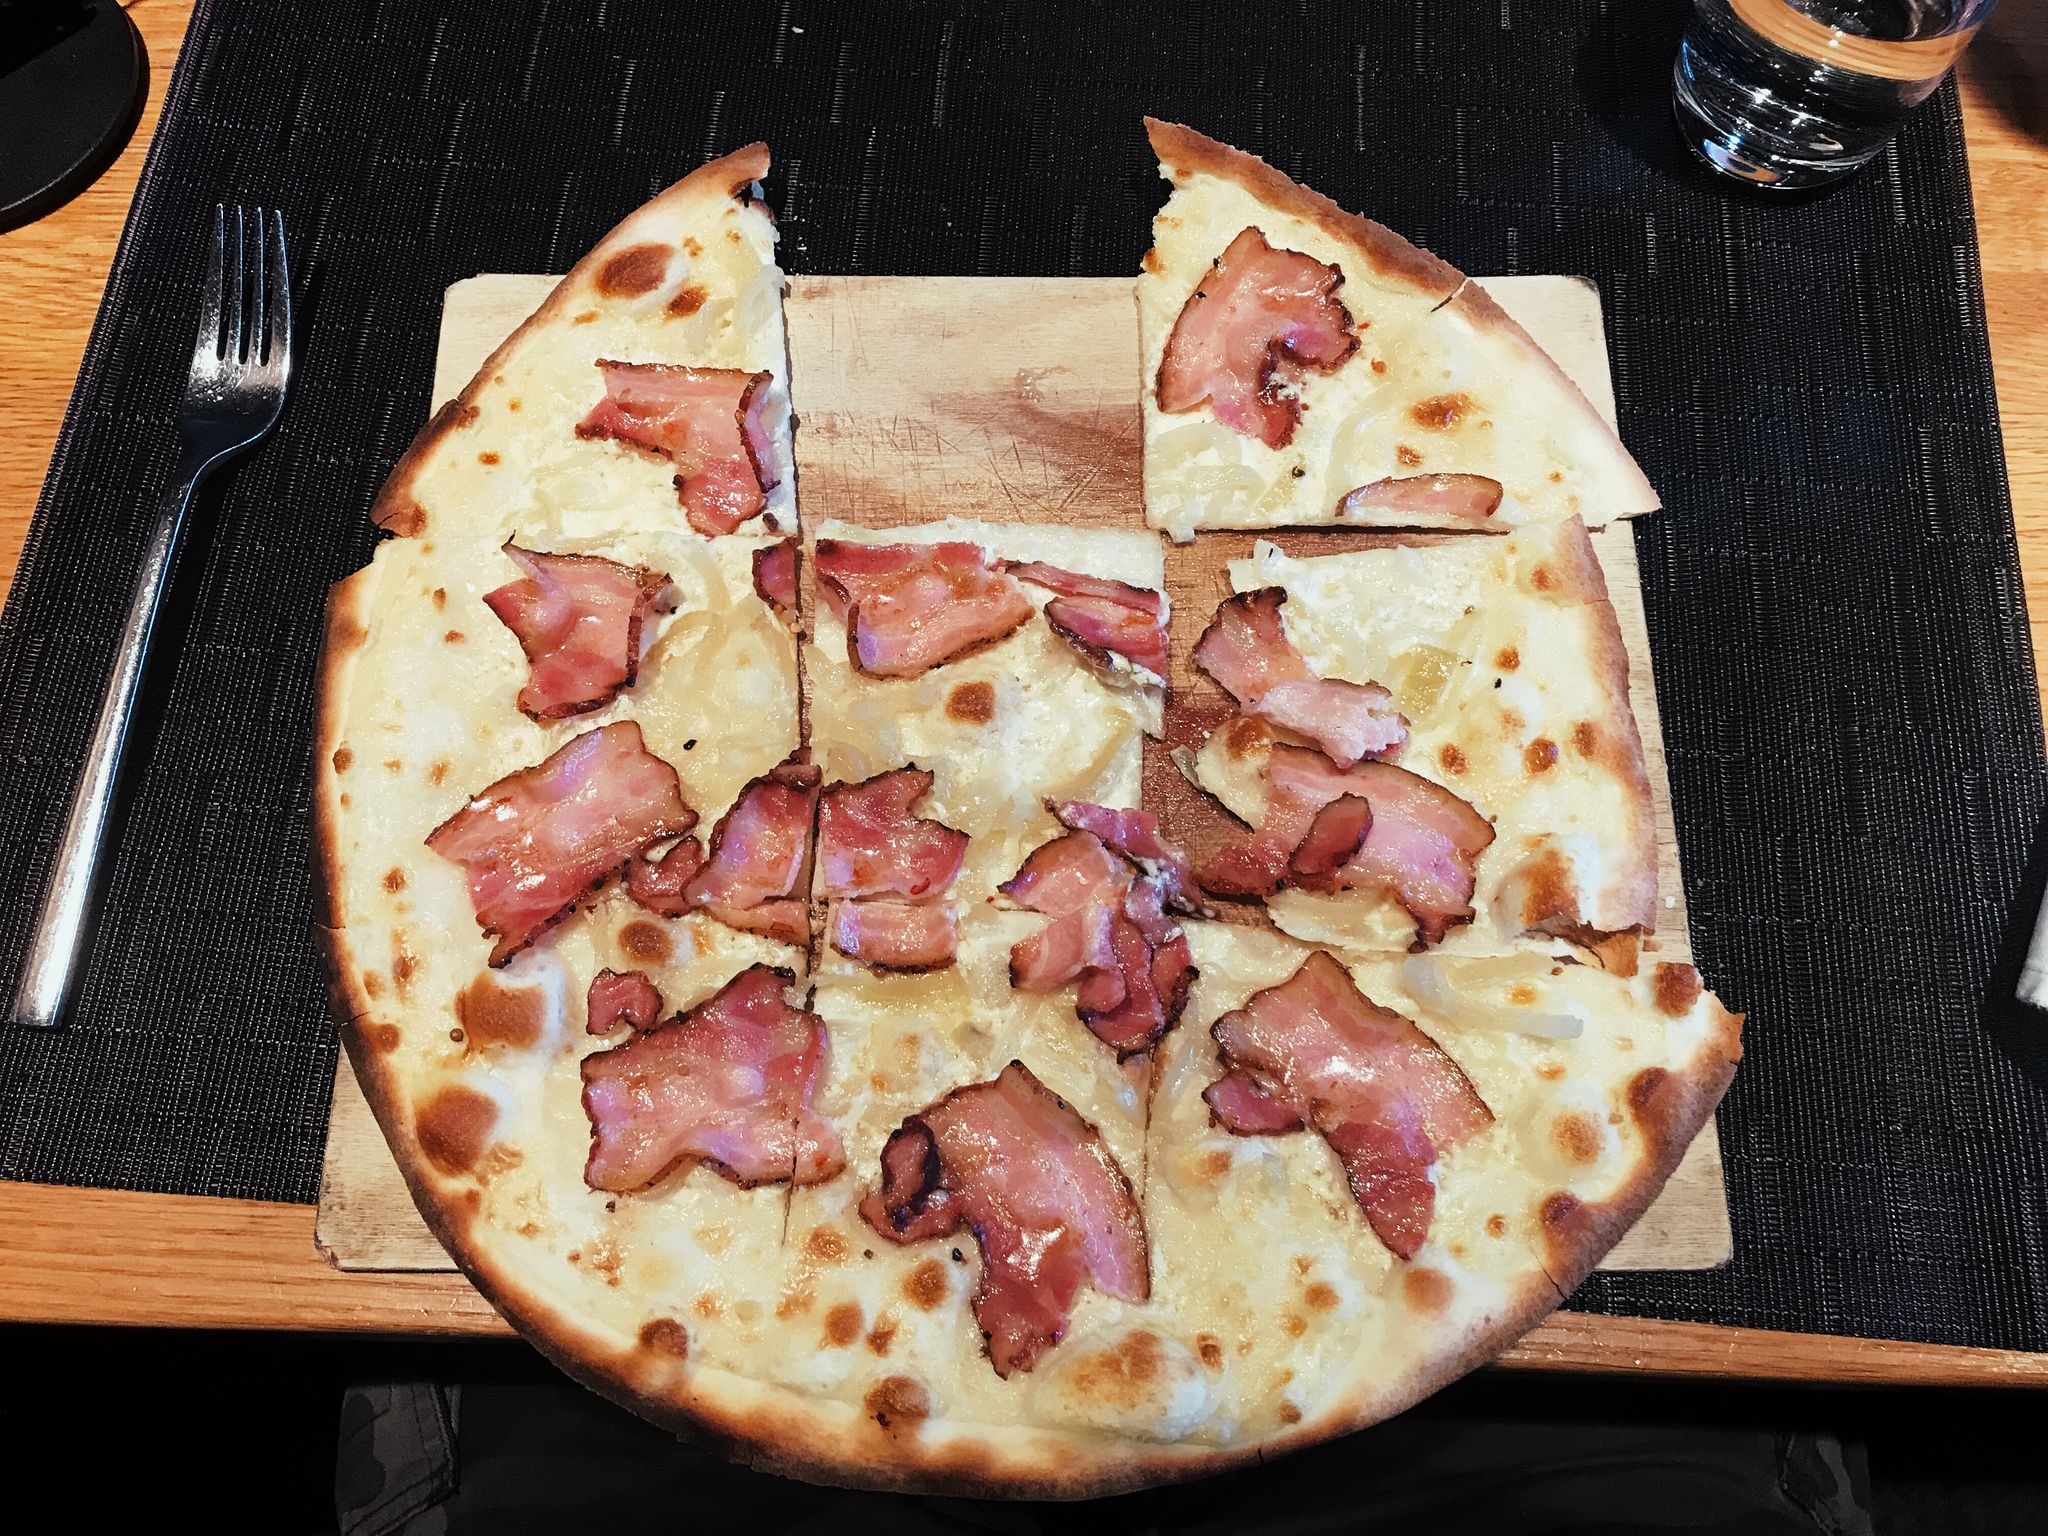 Flammenkuchen, a German dish similar to pizza but without cheese. This one is traditional and has onions and bacon.